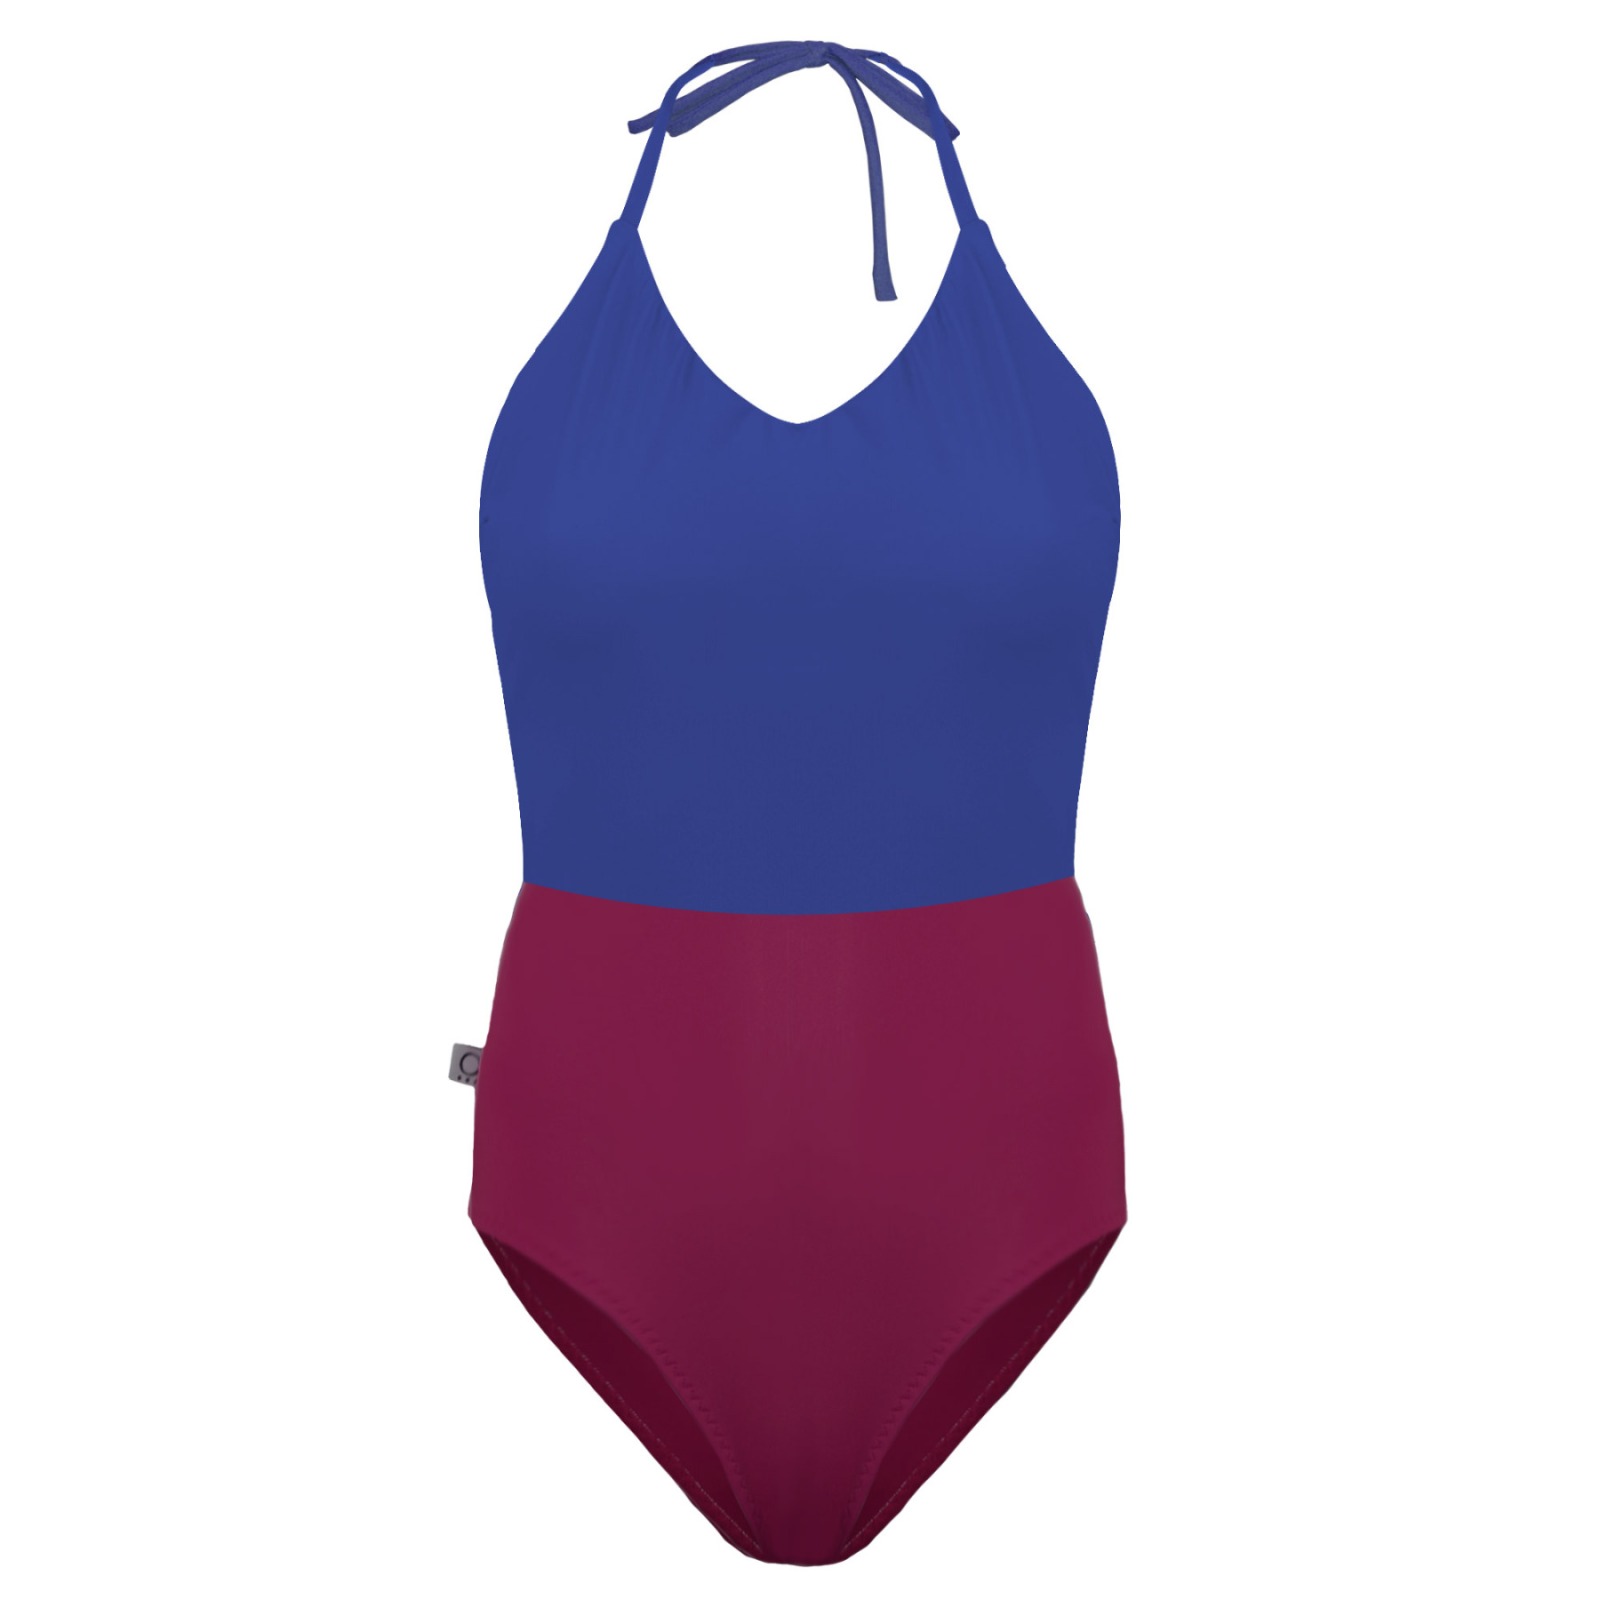 Recycling swimsuit Swea blue + tinto red